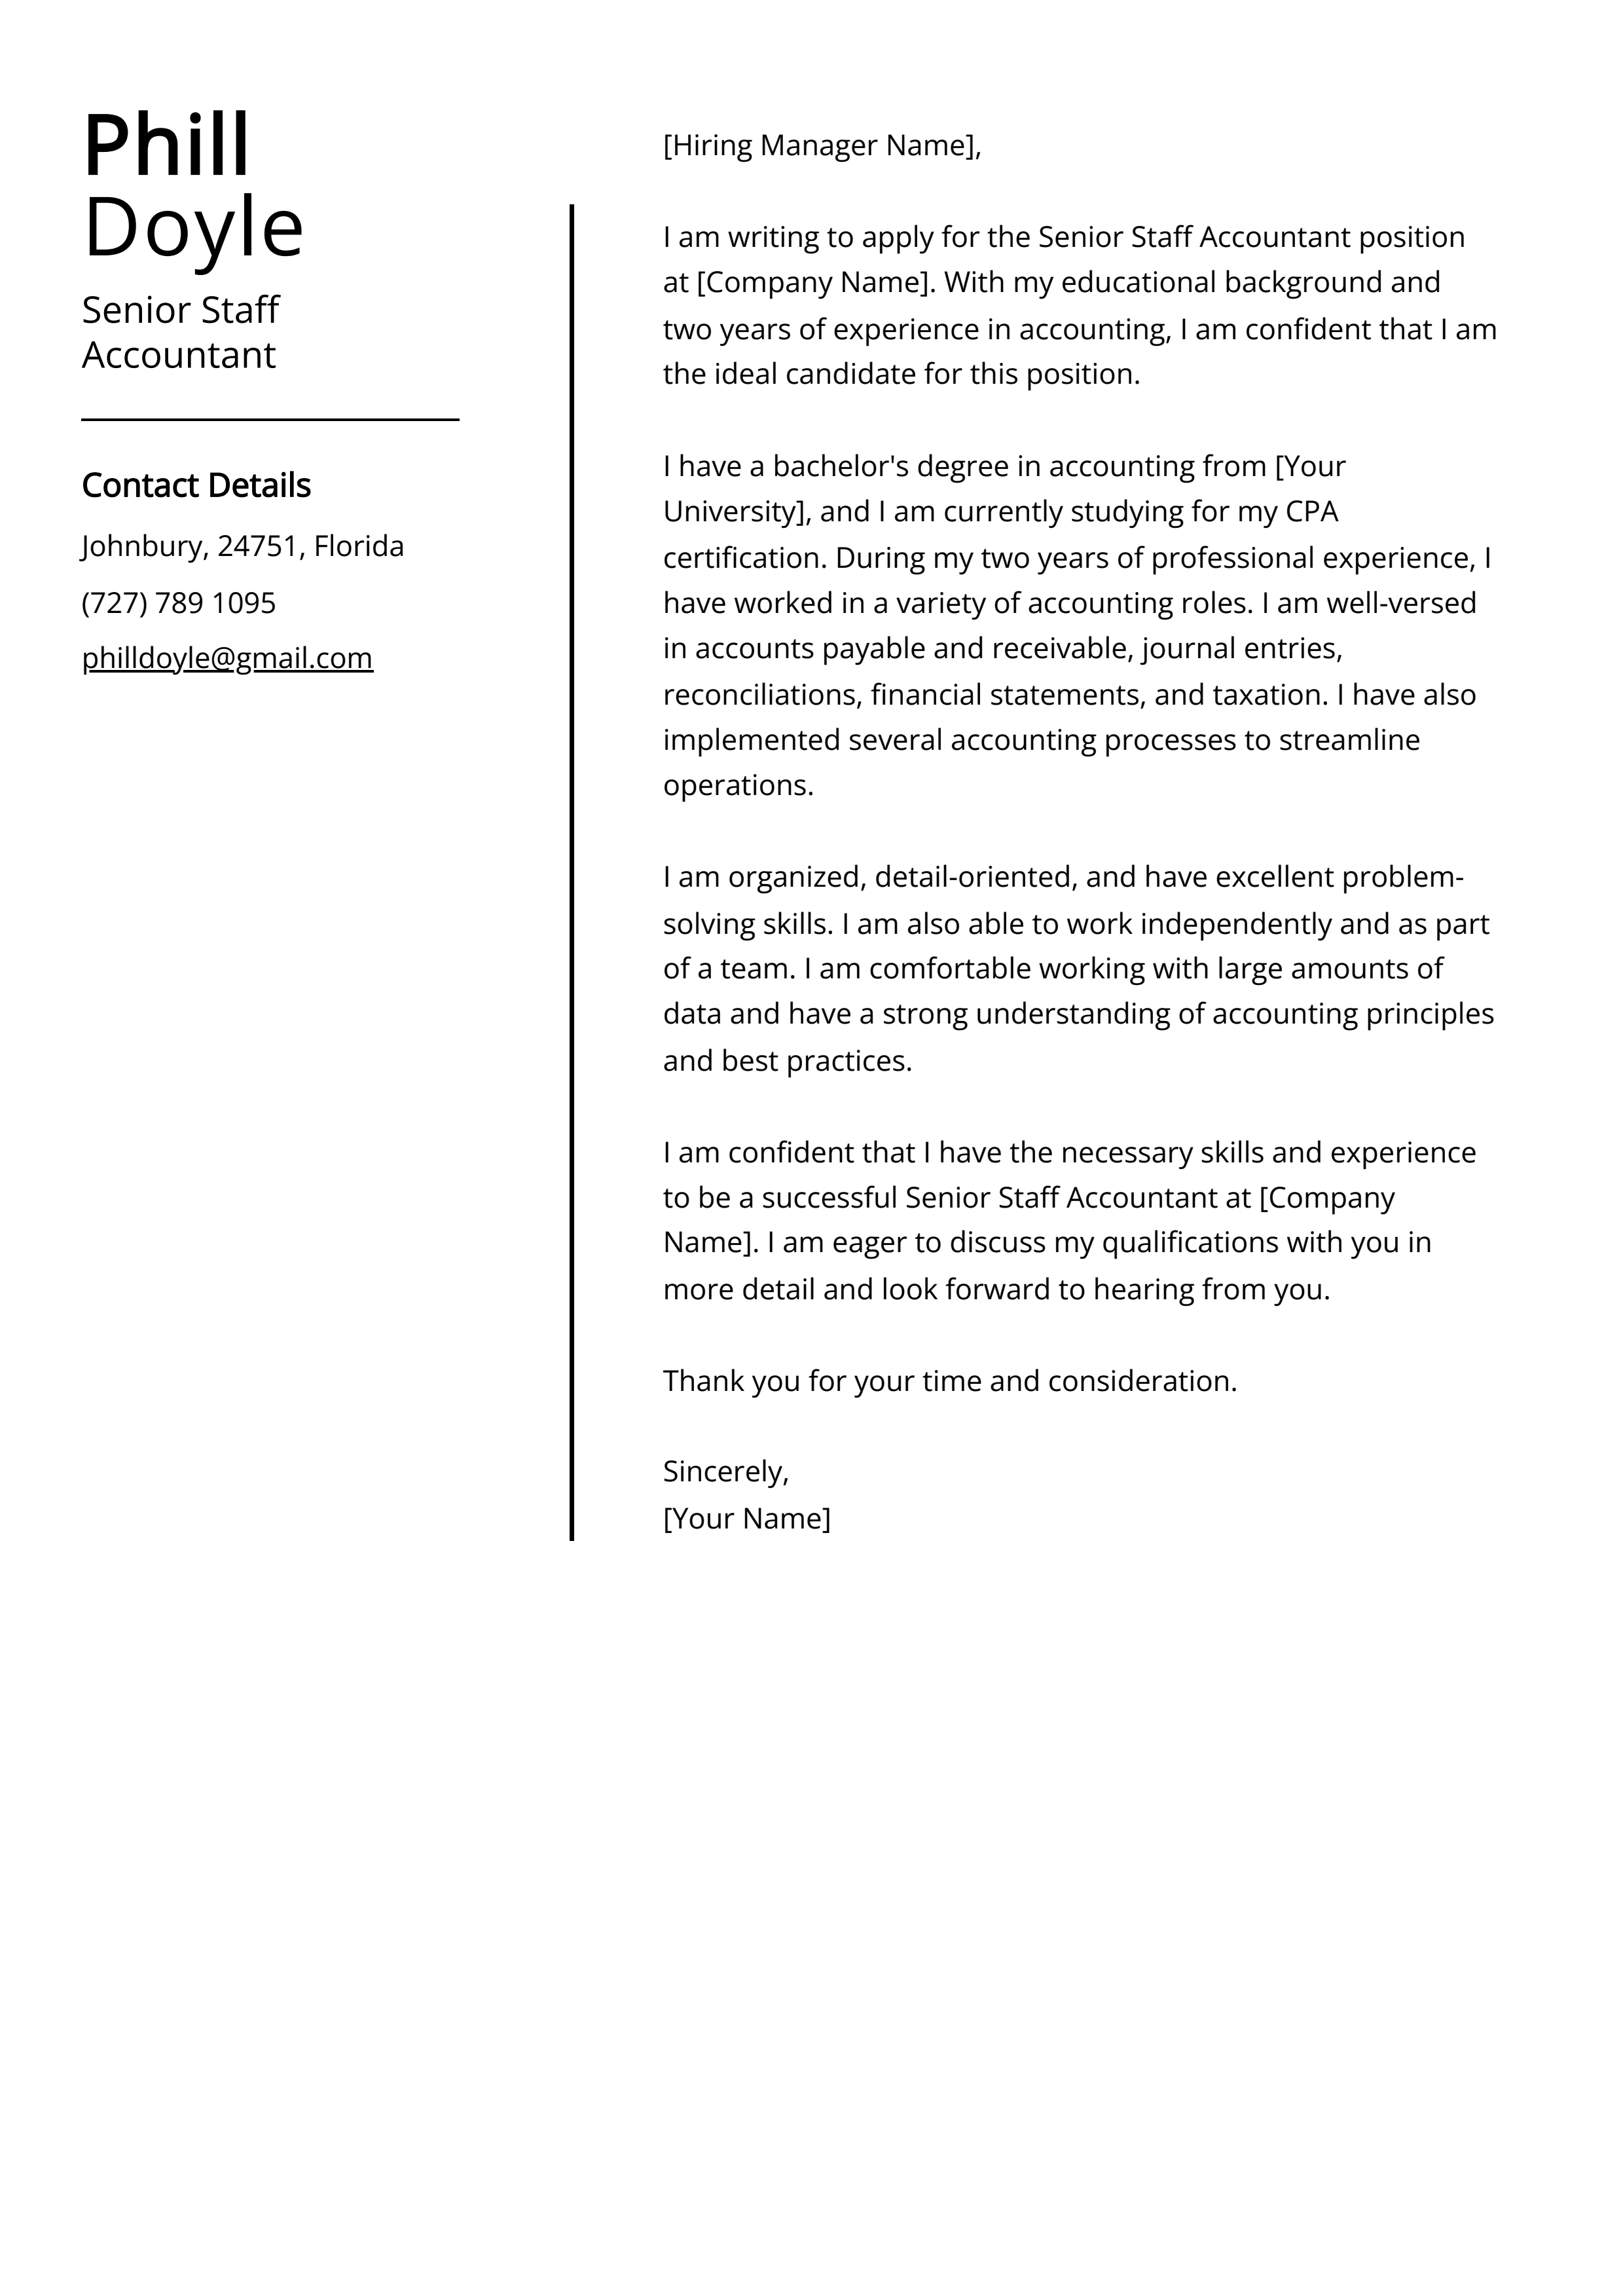 Senior Staff Accountant Cover Letter Example